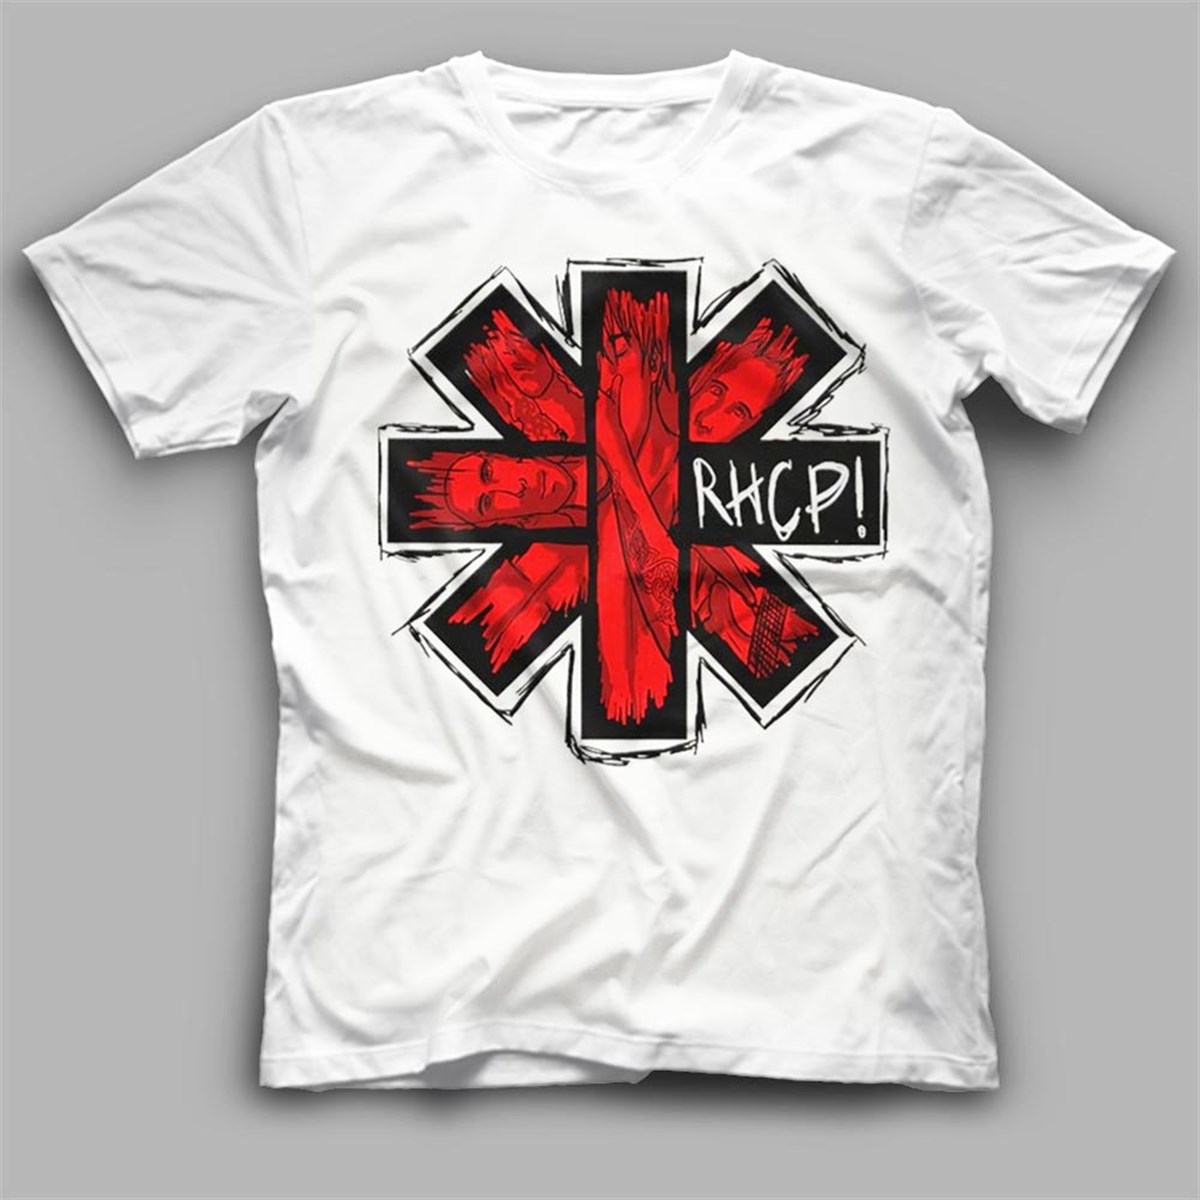 hot chili peppers t shirt